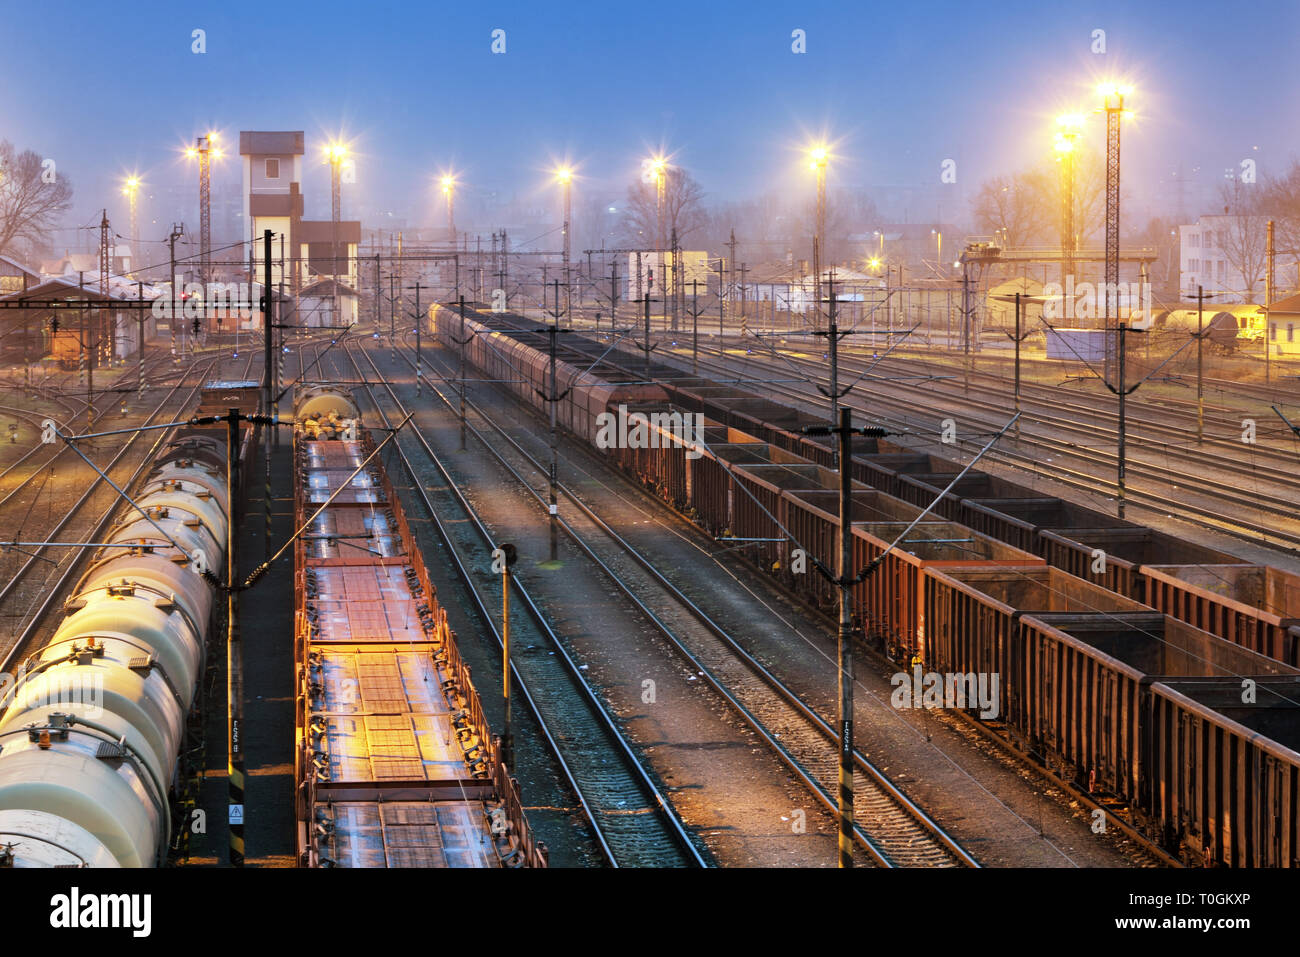 Train railway with freight station, Transportation Stock Photo